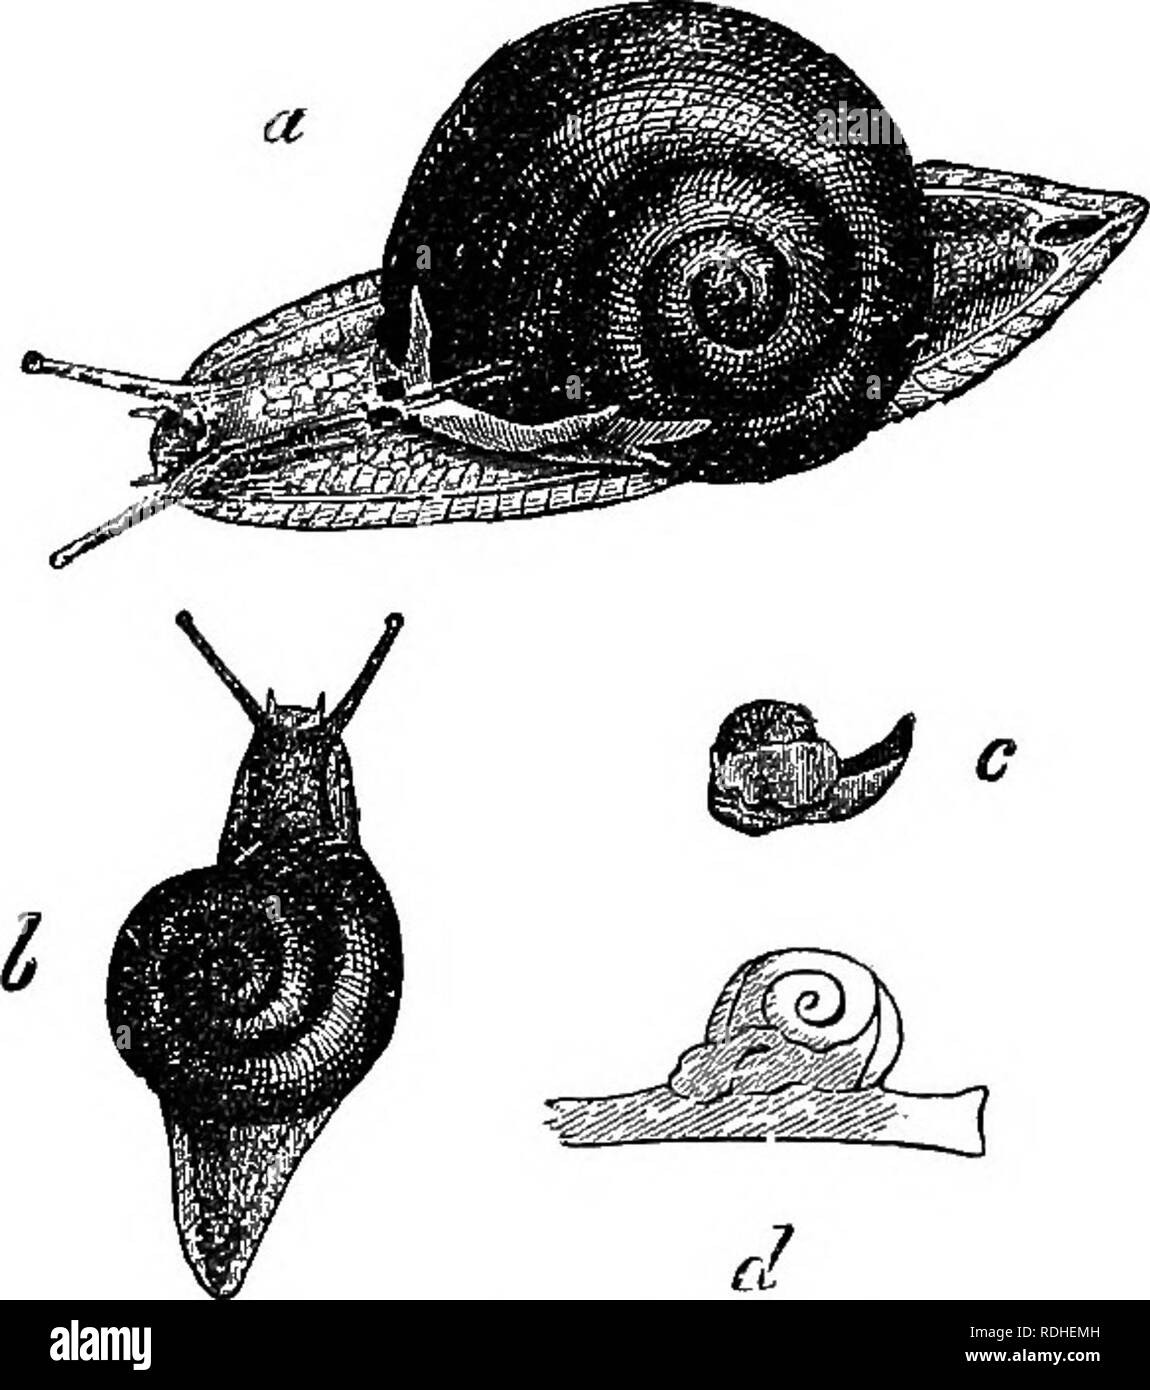 . Animal life as affected by the natural conditions of existence. Animal ecology. MOLLTJSCA OF THE PHILIPPINES. 395 â which the nearest allies are found in Australia and the islands of the Pacificâ^are easily recognisable at the first glance by the mantle lobes, which cover the thin transparent shell, and by their remarkably long, narrow, high-ridged tail, which ends abruptly in a gland; a kind of horn, sometimes of some length, projects from the tip of the tail. The numerous speciesâof which the various distinguishing characteristics are much more conspicuous in anatomical details than in the Stock Photo